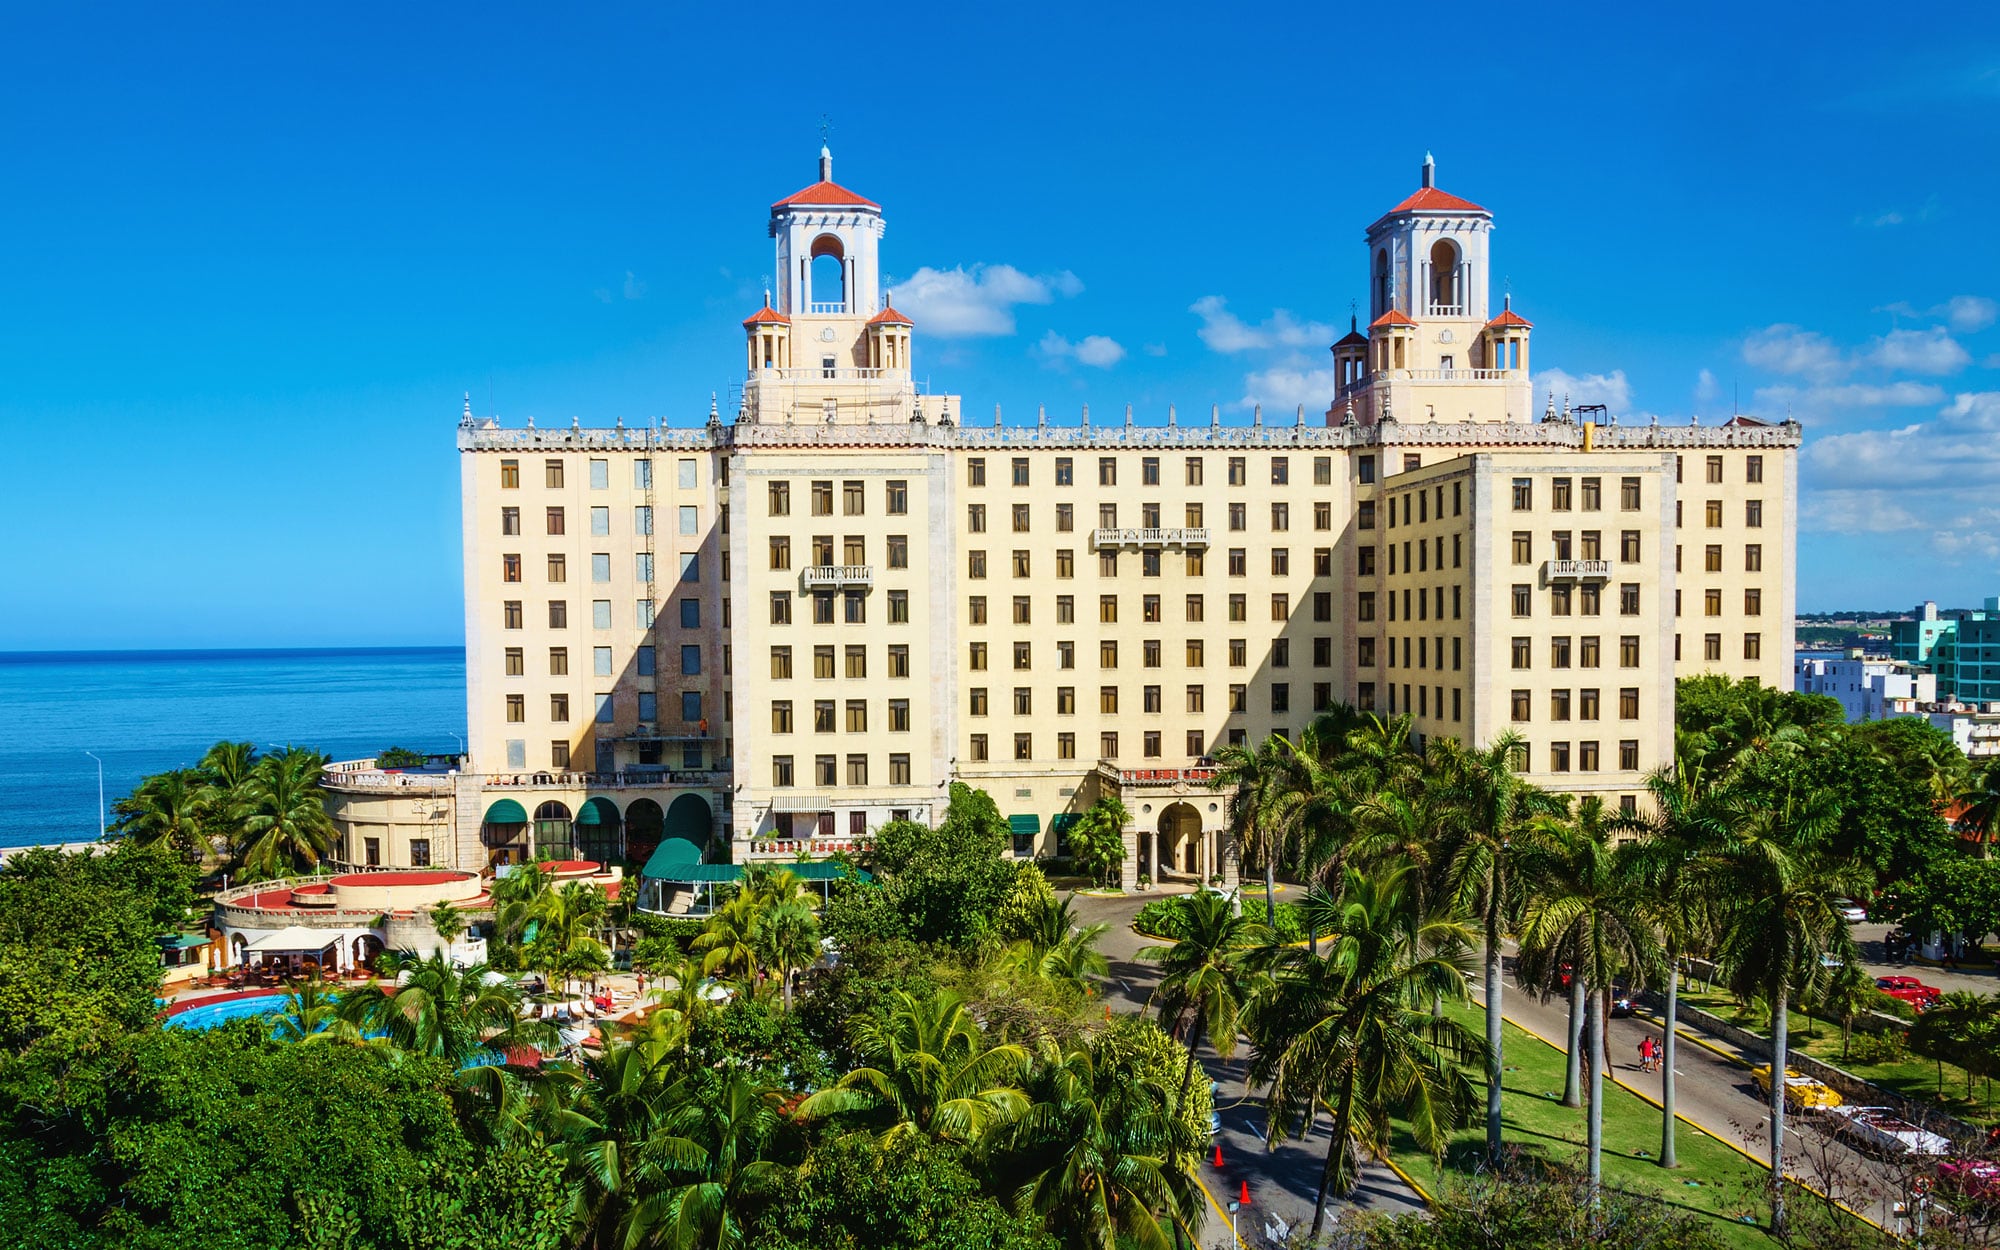 My Travel Omart – The 5 Most Beautiful Hotels in Cuba